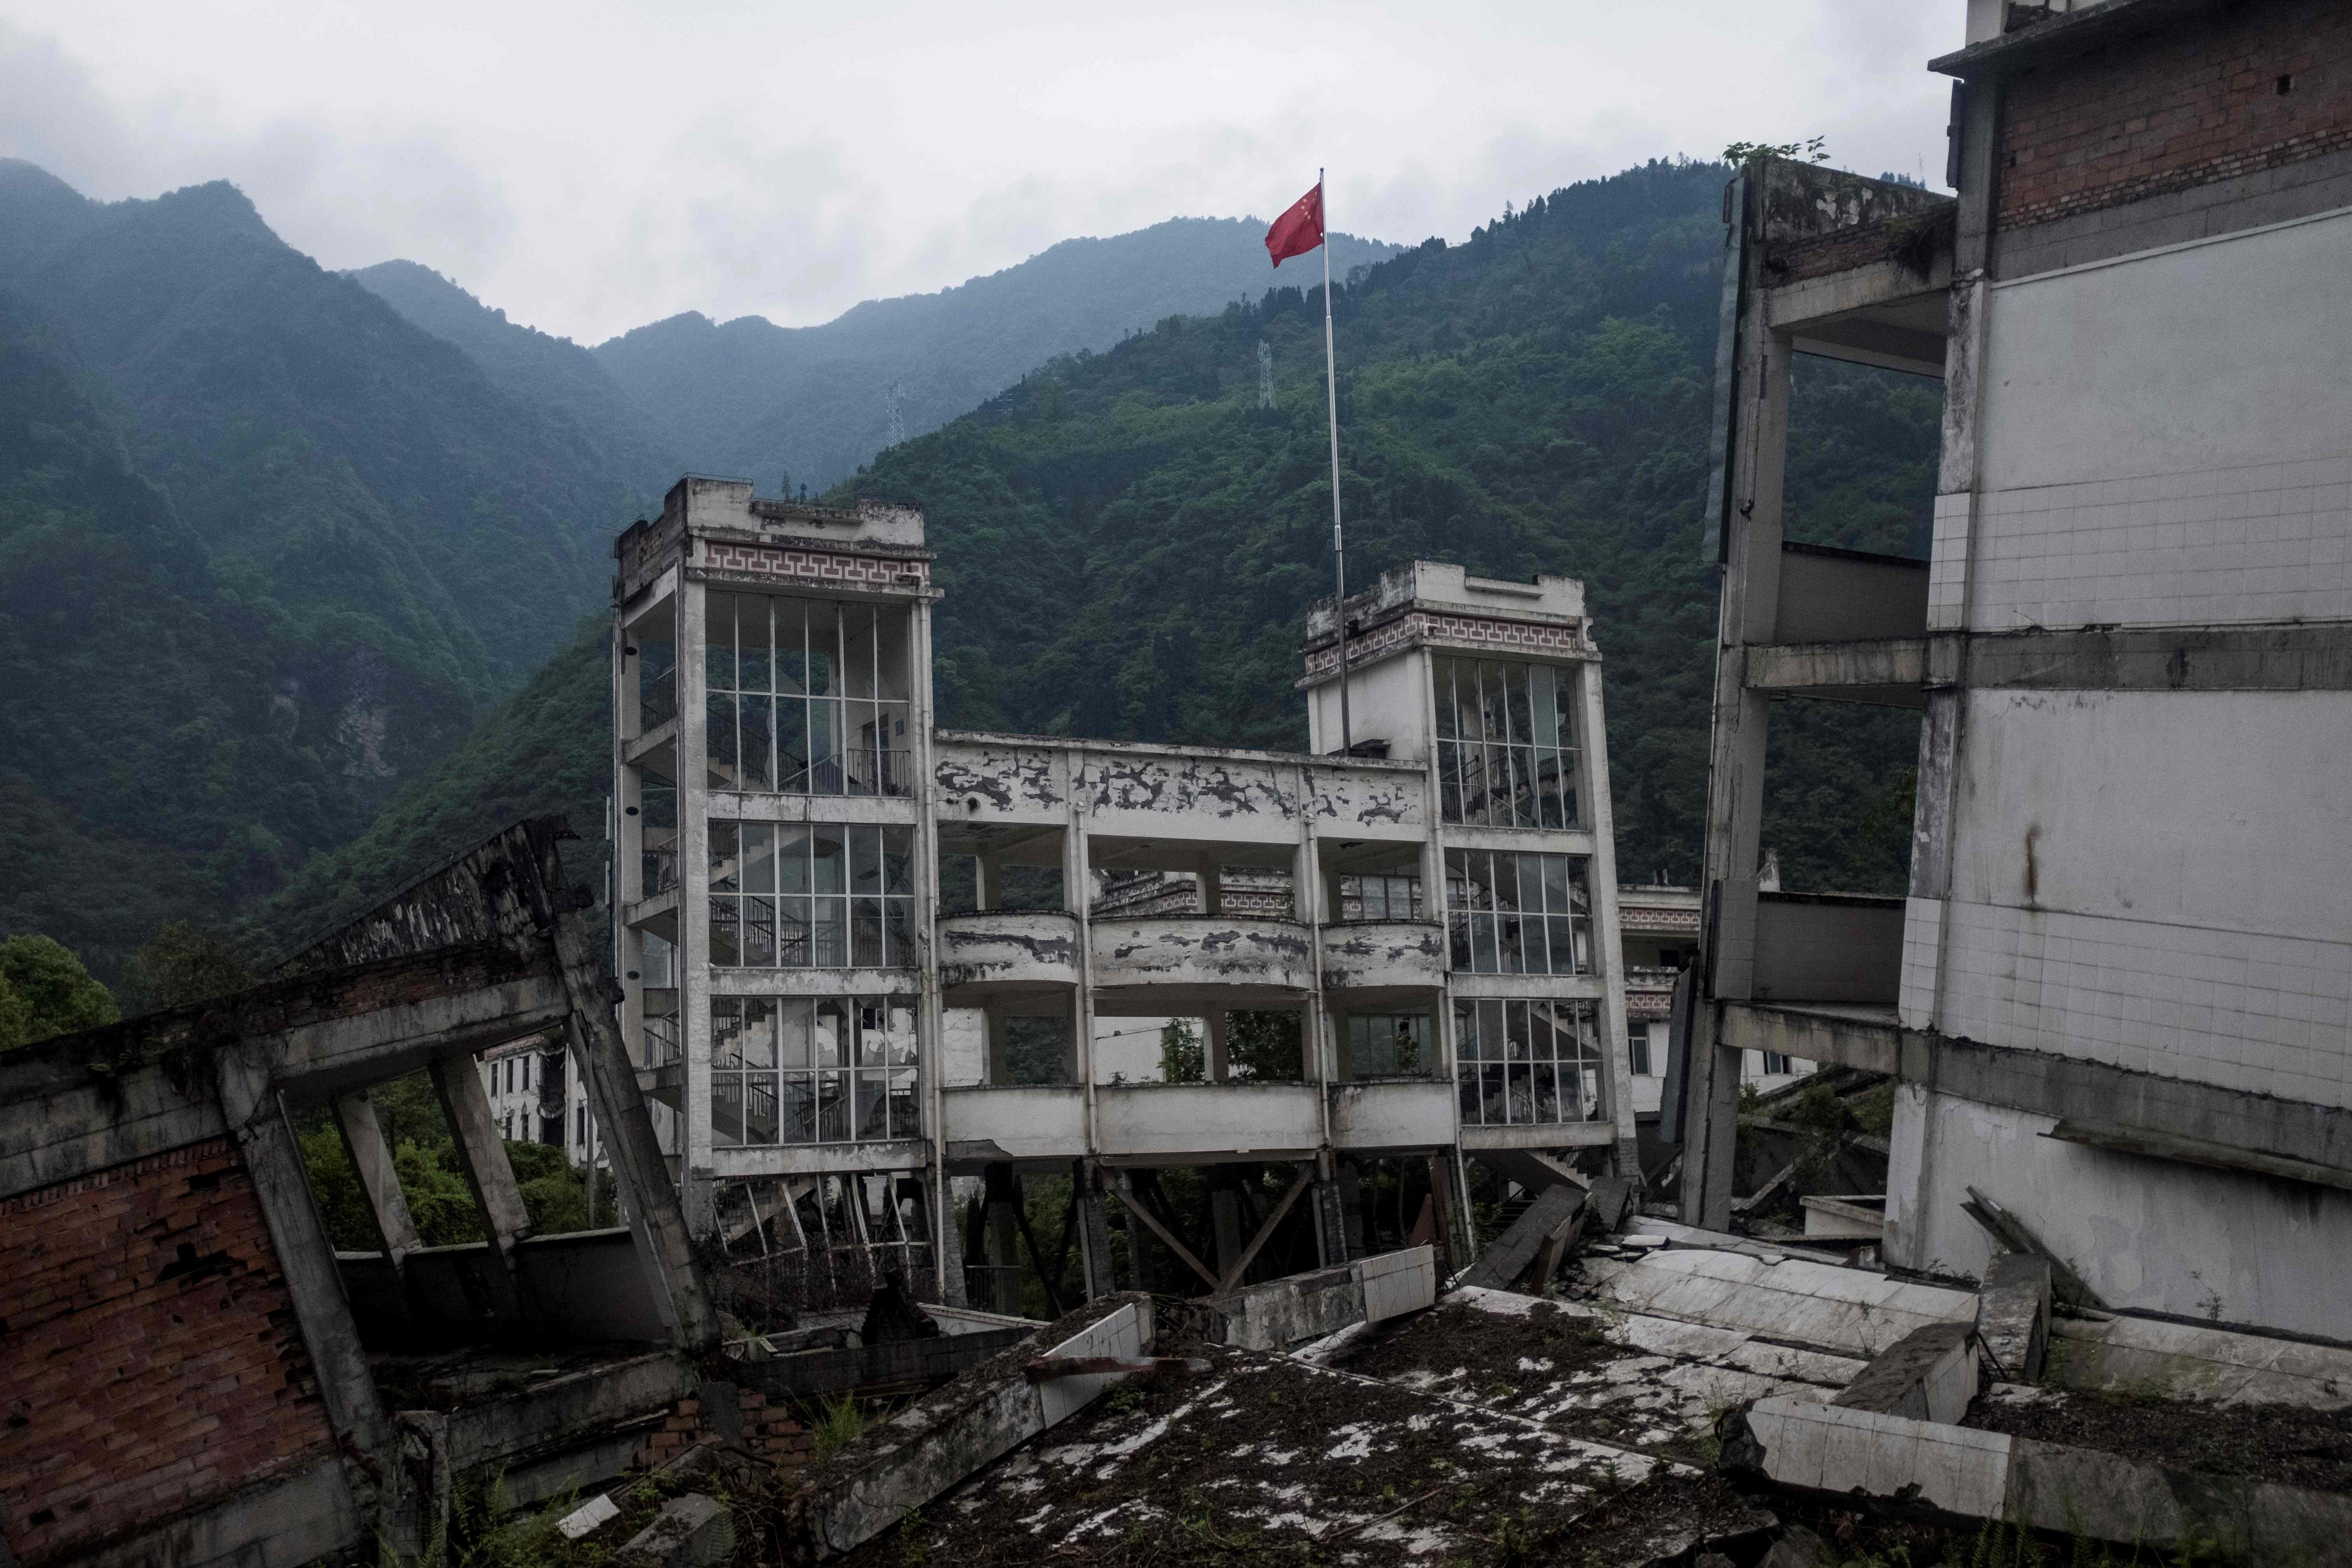 This picture taken on April 21, 2018 shows part of the destroyed Xuankou Middle School, now a memorial site for the 2008 Sichuan earthquake, in Yingxiu, China. Photo: AFP